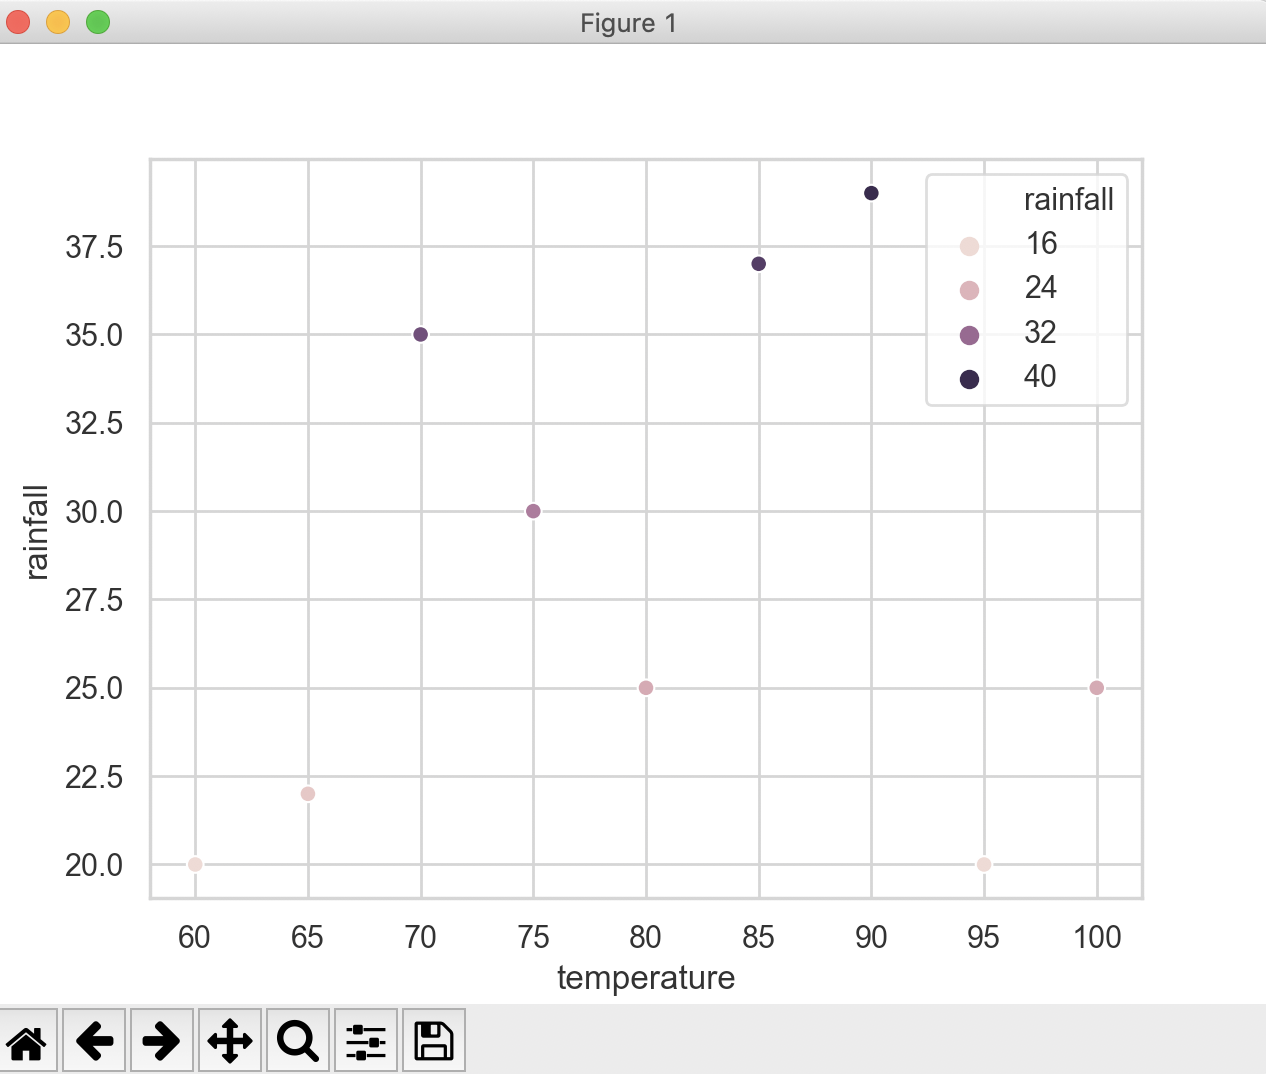 Scatter plot drawn using seaborn with hue parameter used to distinguish numeric data